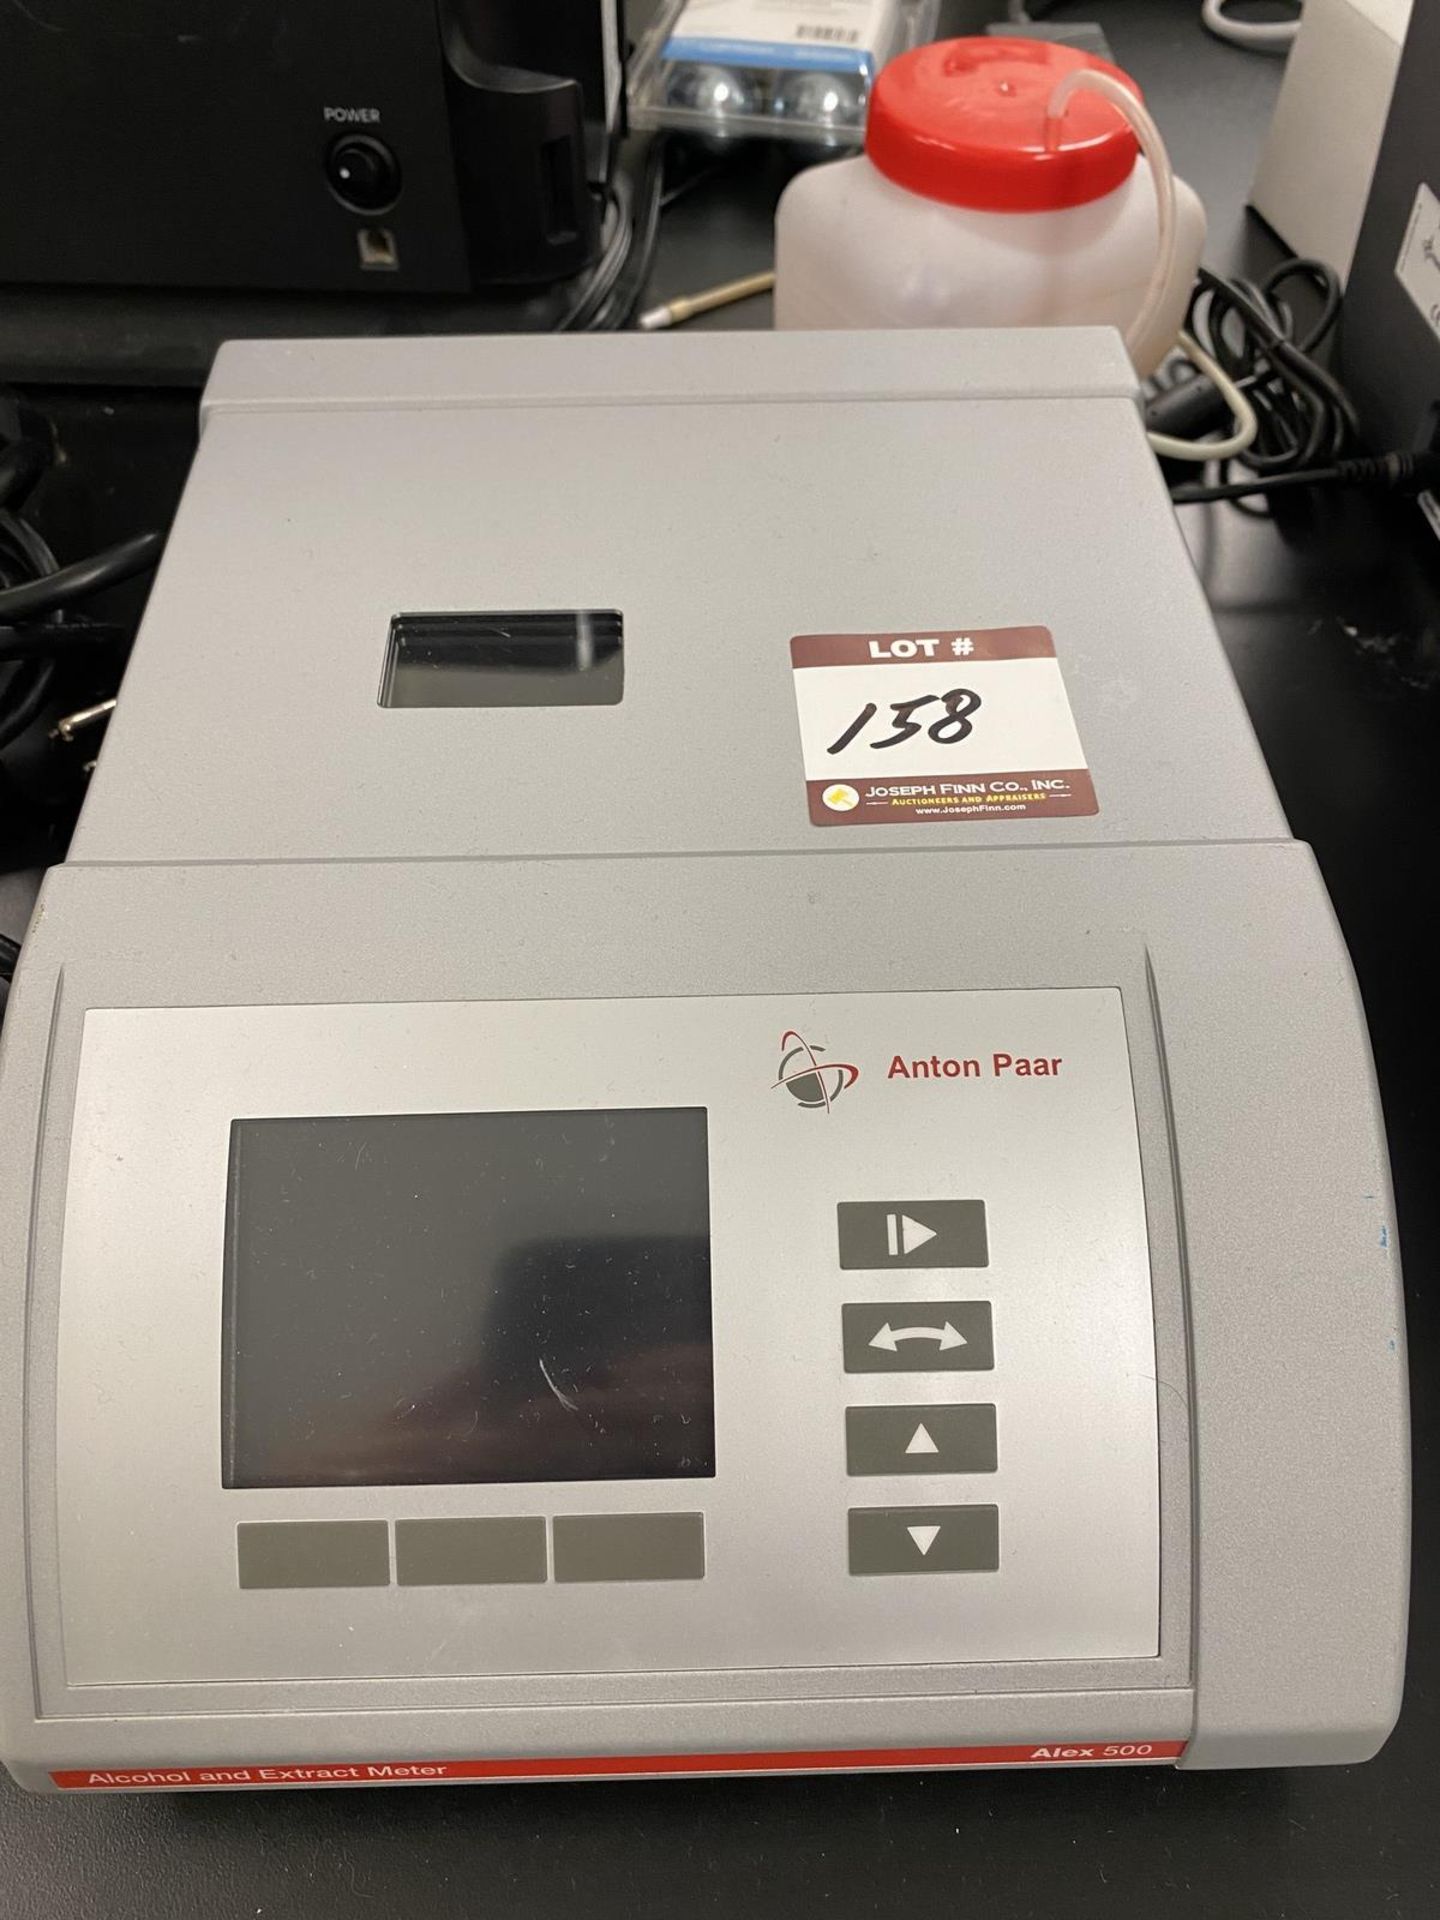 Anton Paar Alex 500 Alcohol and Extract Meter s/n 81870905 | Rig Fee: $250 or HC